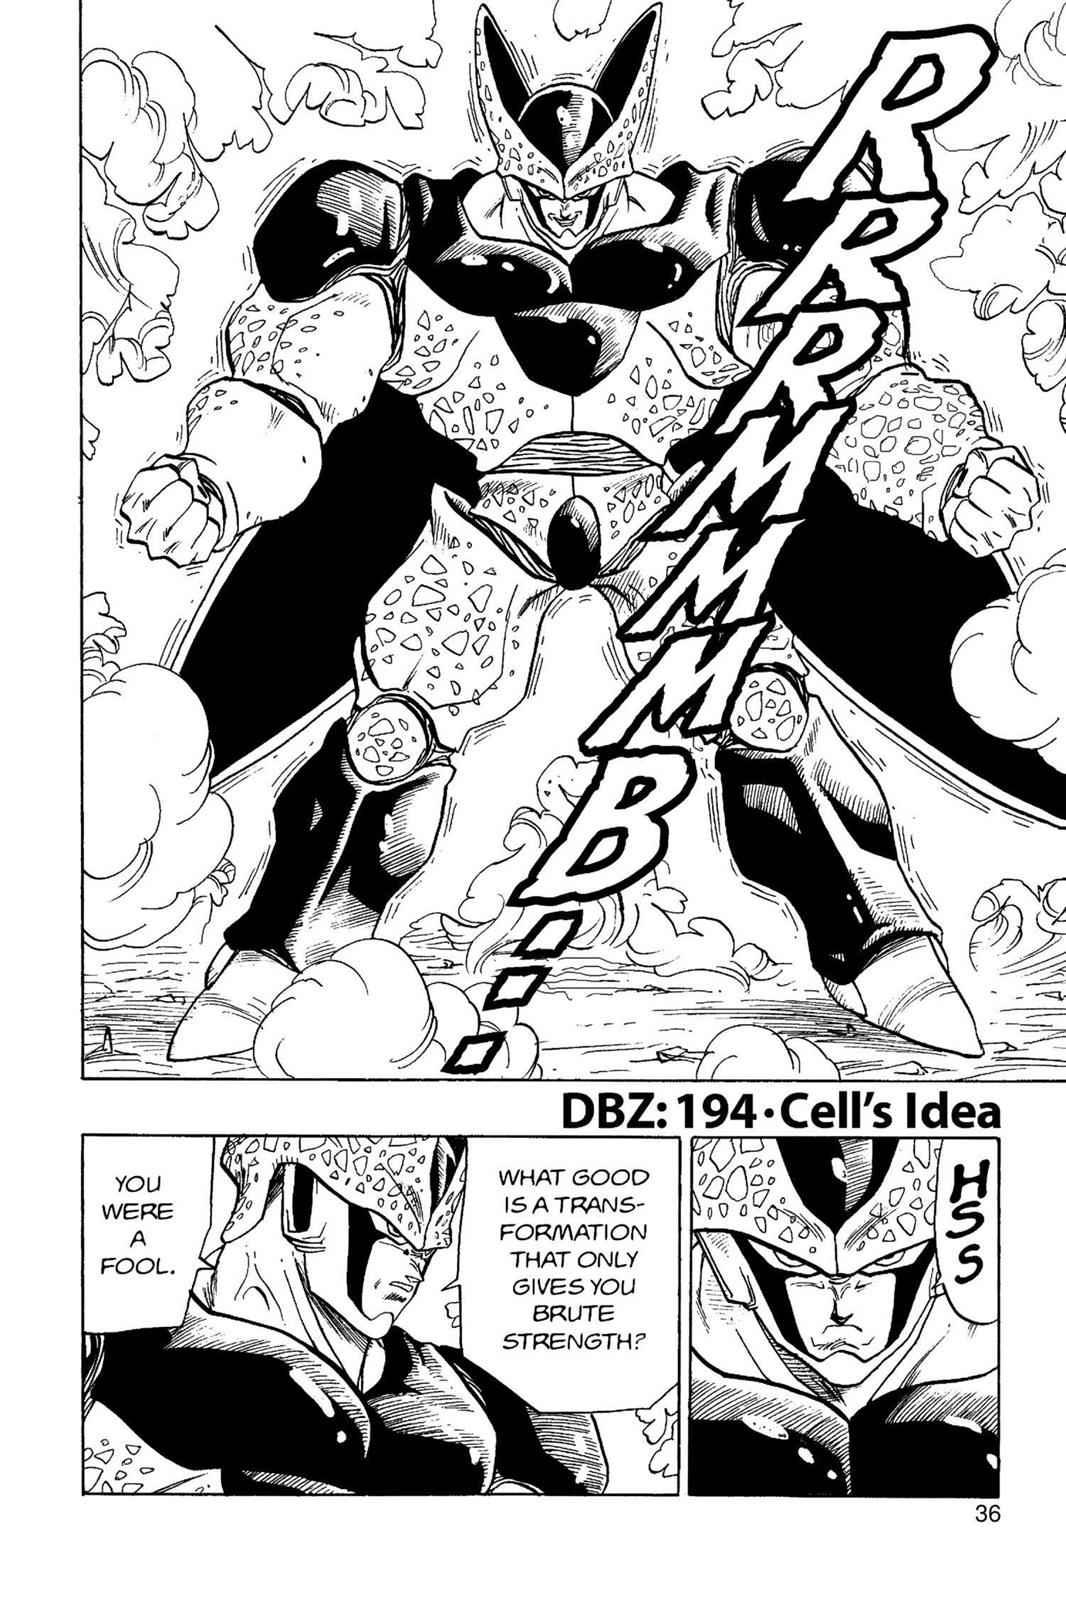 Universe 12 - Hope and despair - Chapter 92, Page 2150 - DBMultiverse